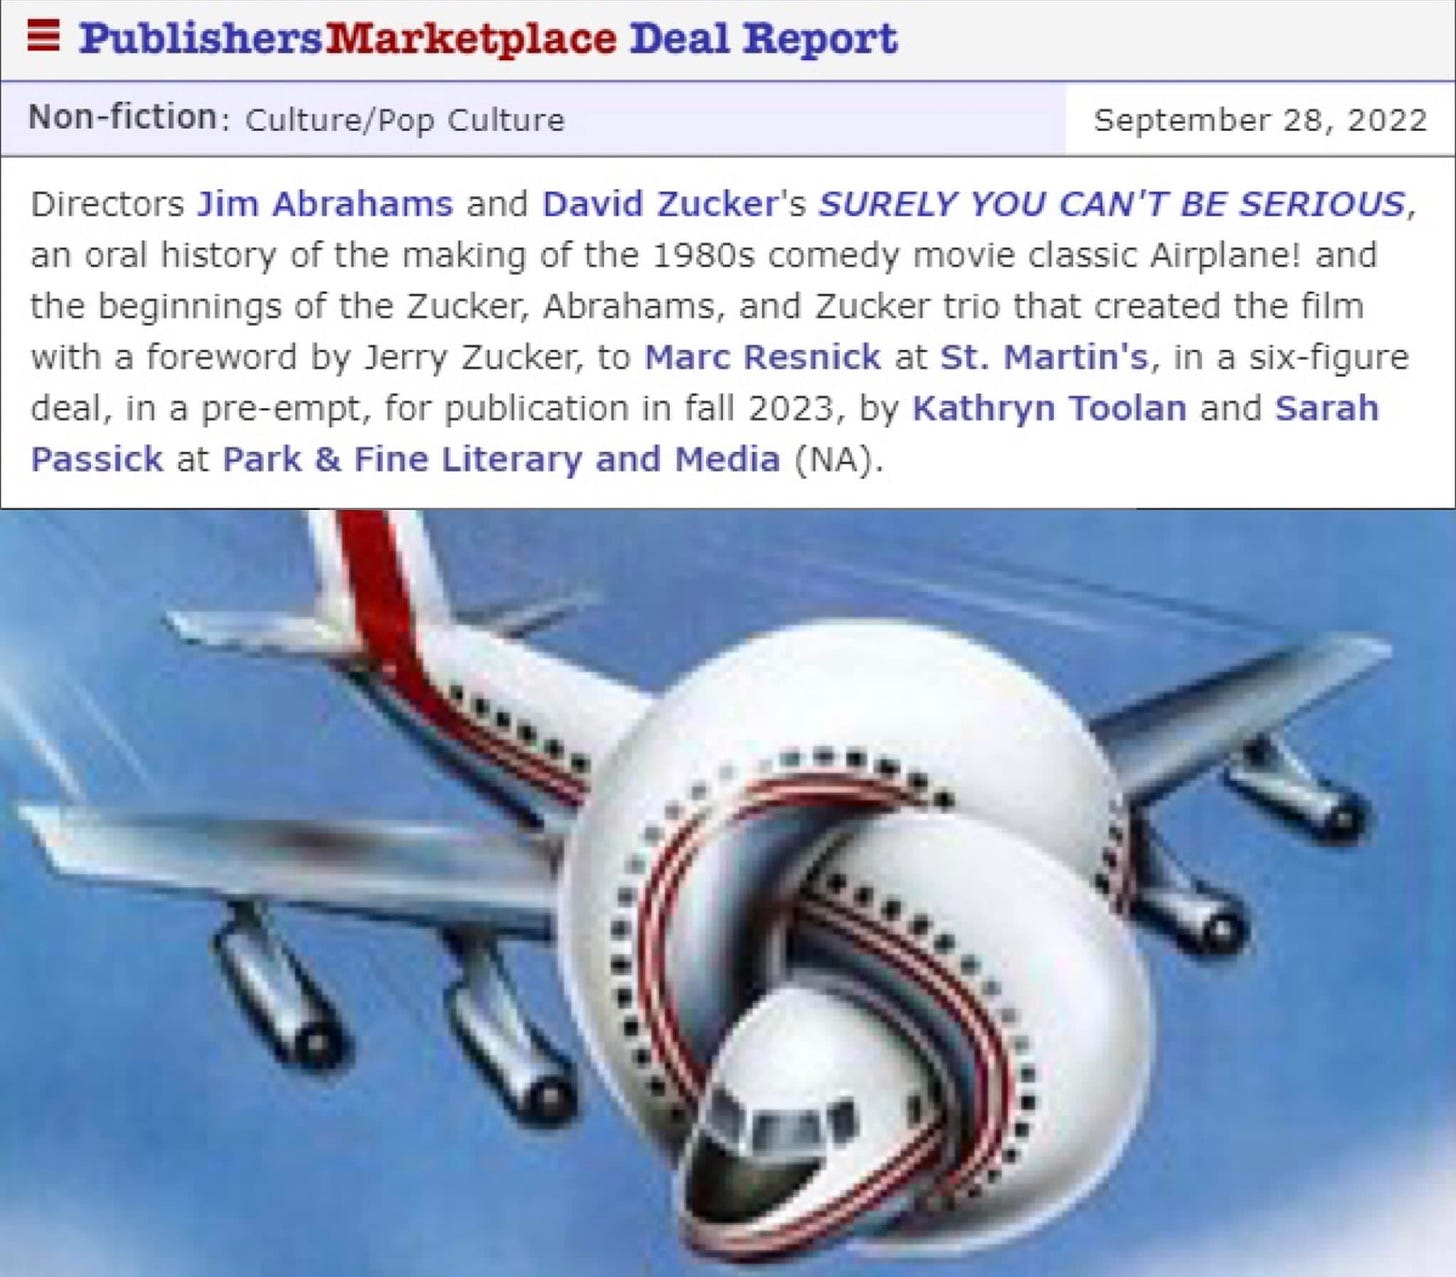 May be an image of text that says 'Publishers Marketplac Deal Report Non-fiction: Culture/Pop Culture September 28, 2022 Directors Jim Abrahams and David Zucker's SURELY YOU CAN'T BE SERIOUS, an oral history of the making of the 1980s comedy movie classic Airplane! and the beginnings of the Zucker, Abrahams, and Zucker trio that created the film with foreword by Jerry Zucker, to Marc Resnick at St. Martin's, in a six-figure deal,in a pre-empt, for publication in fall 2023, by Kathryn Toolan and Sarah Passick at Park & Fine Literary and Media (NA).'